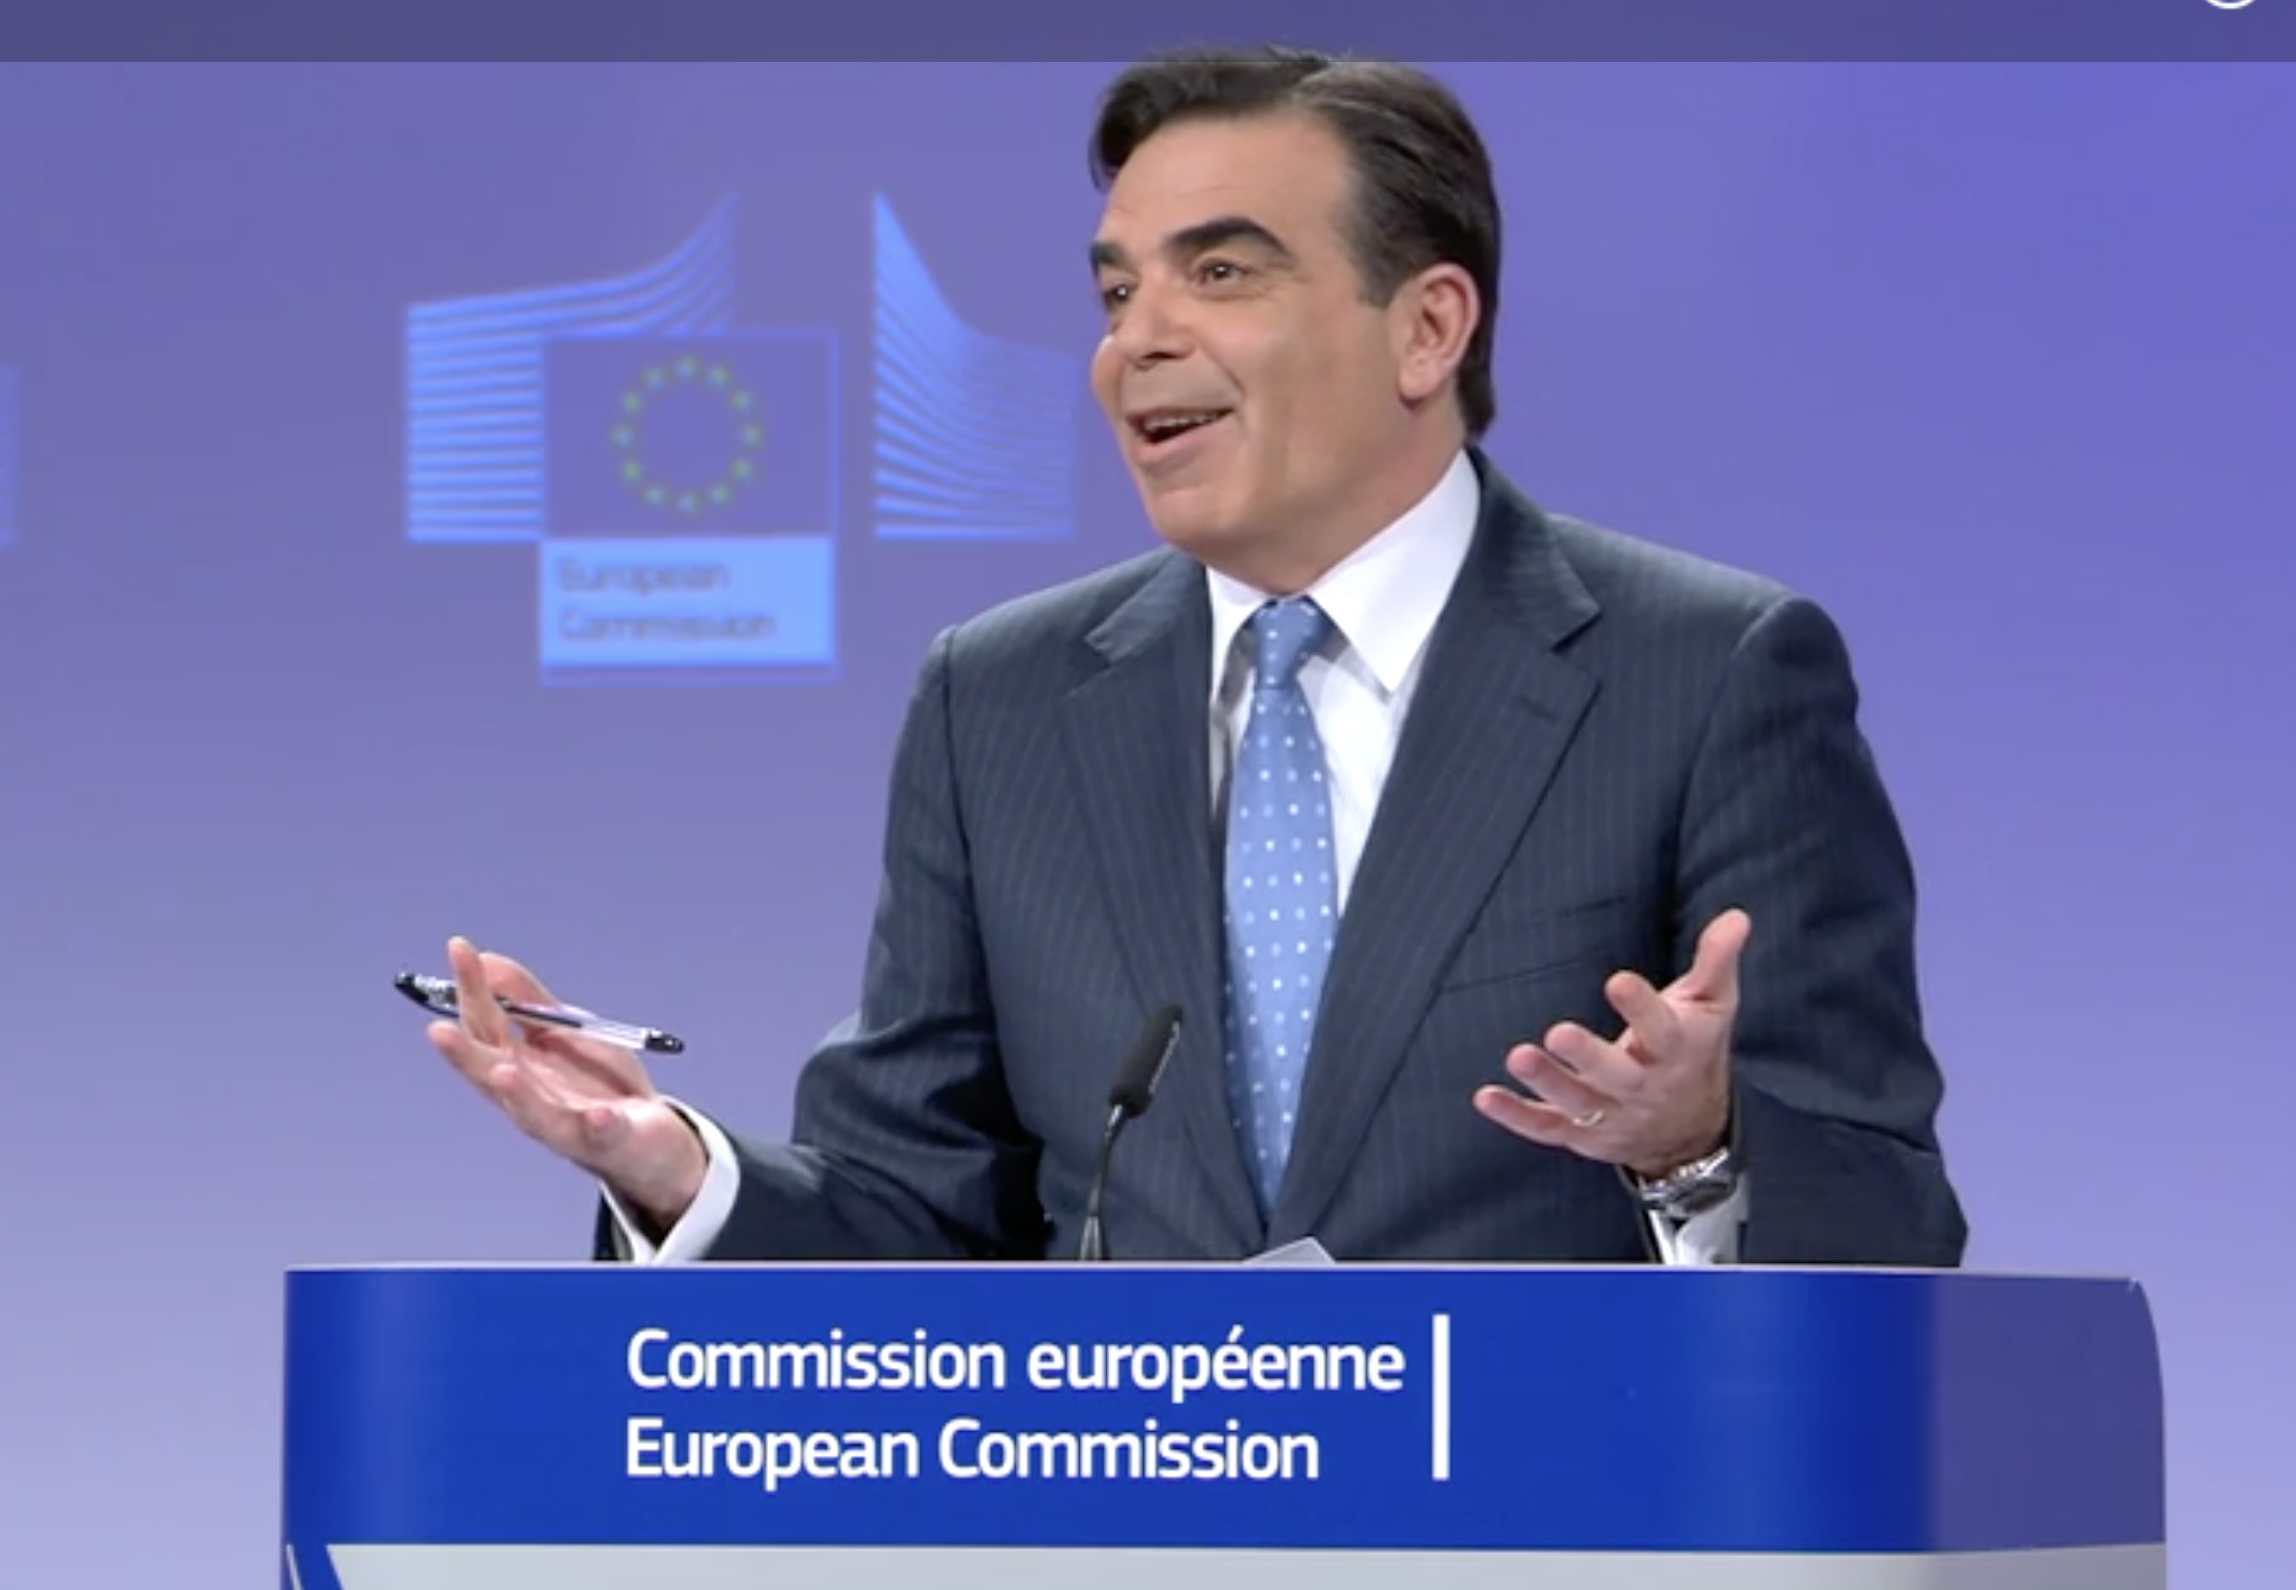 The controversial job was given to Margaritis Schinas, formerly the EU Commission’s chief spokesperson